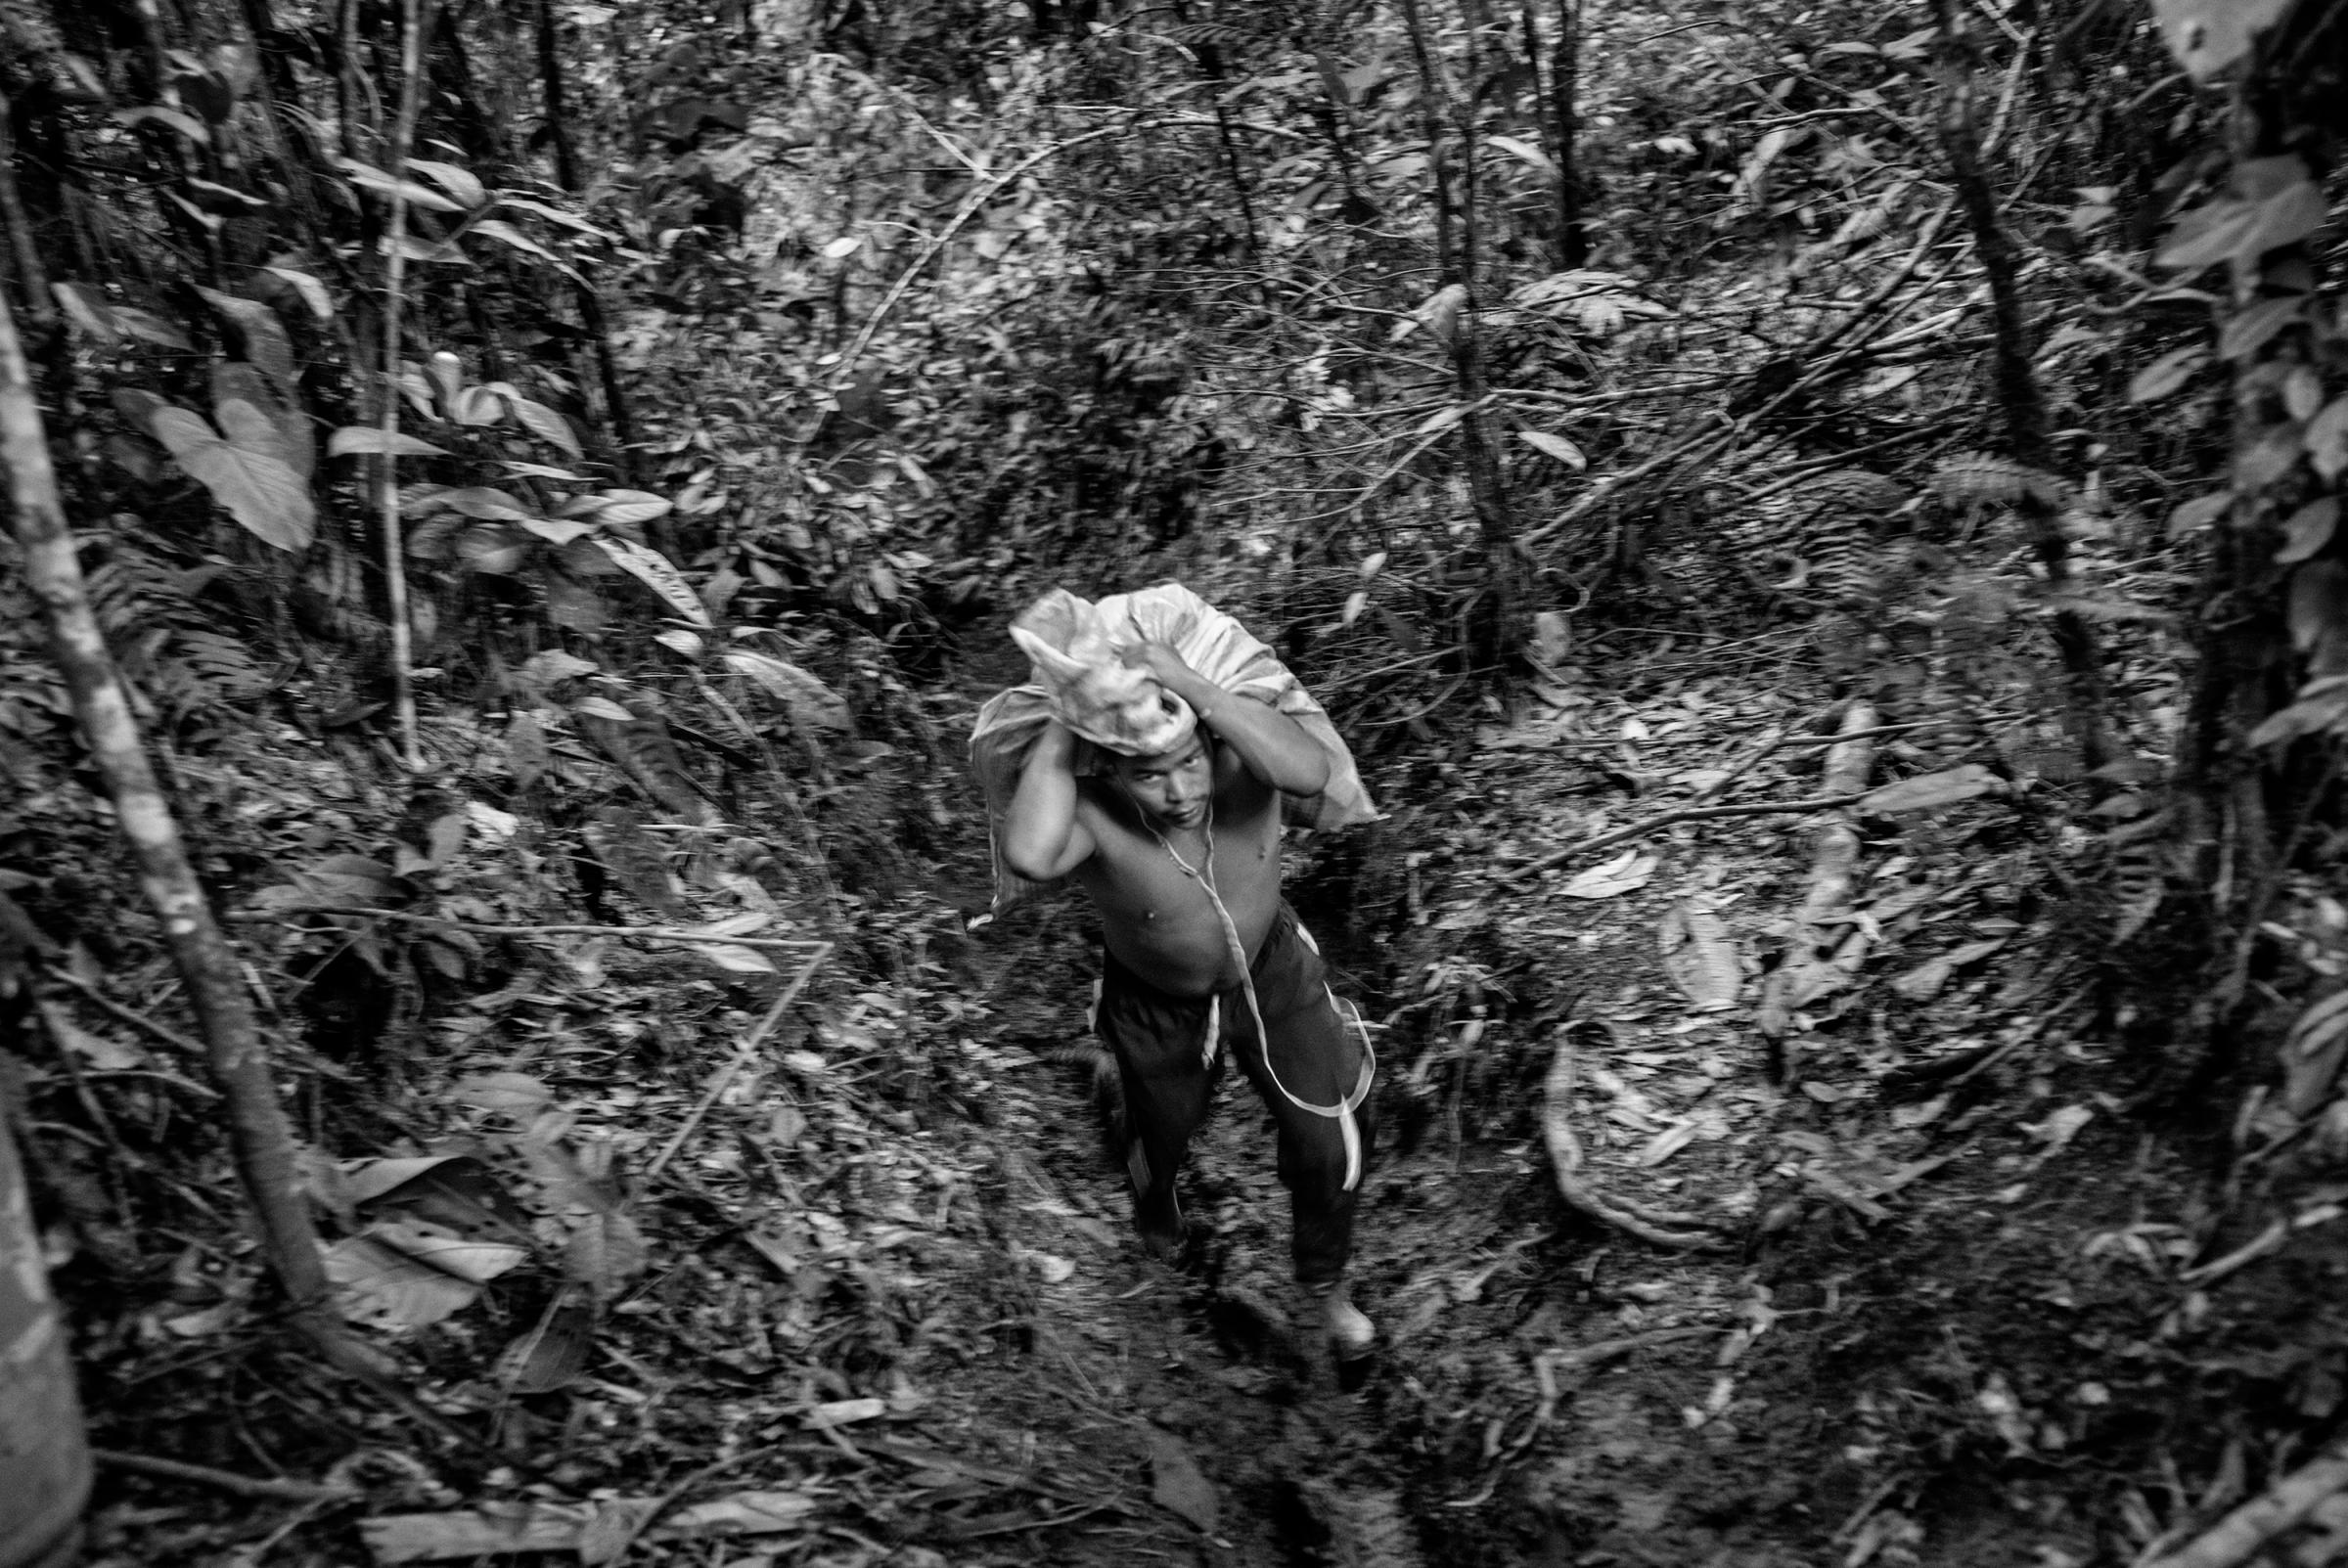 A guerrilla member of the FARC carries supplies to a camp, Cauca, Colombia, July 2016.